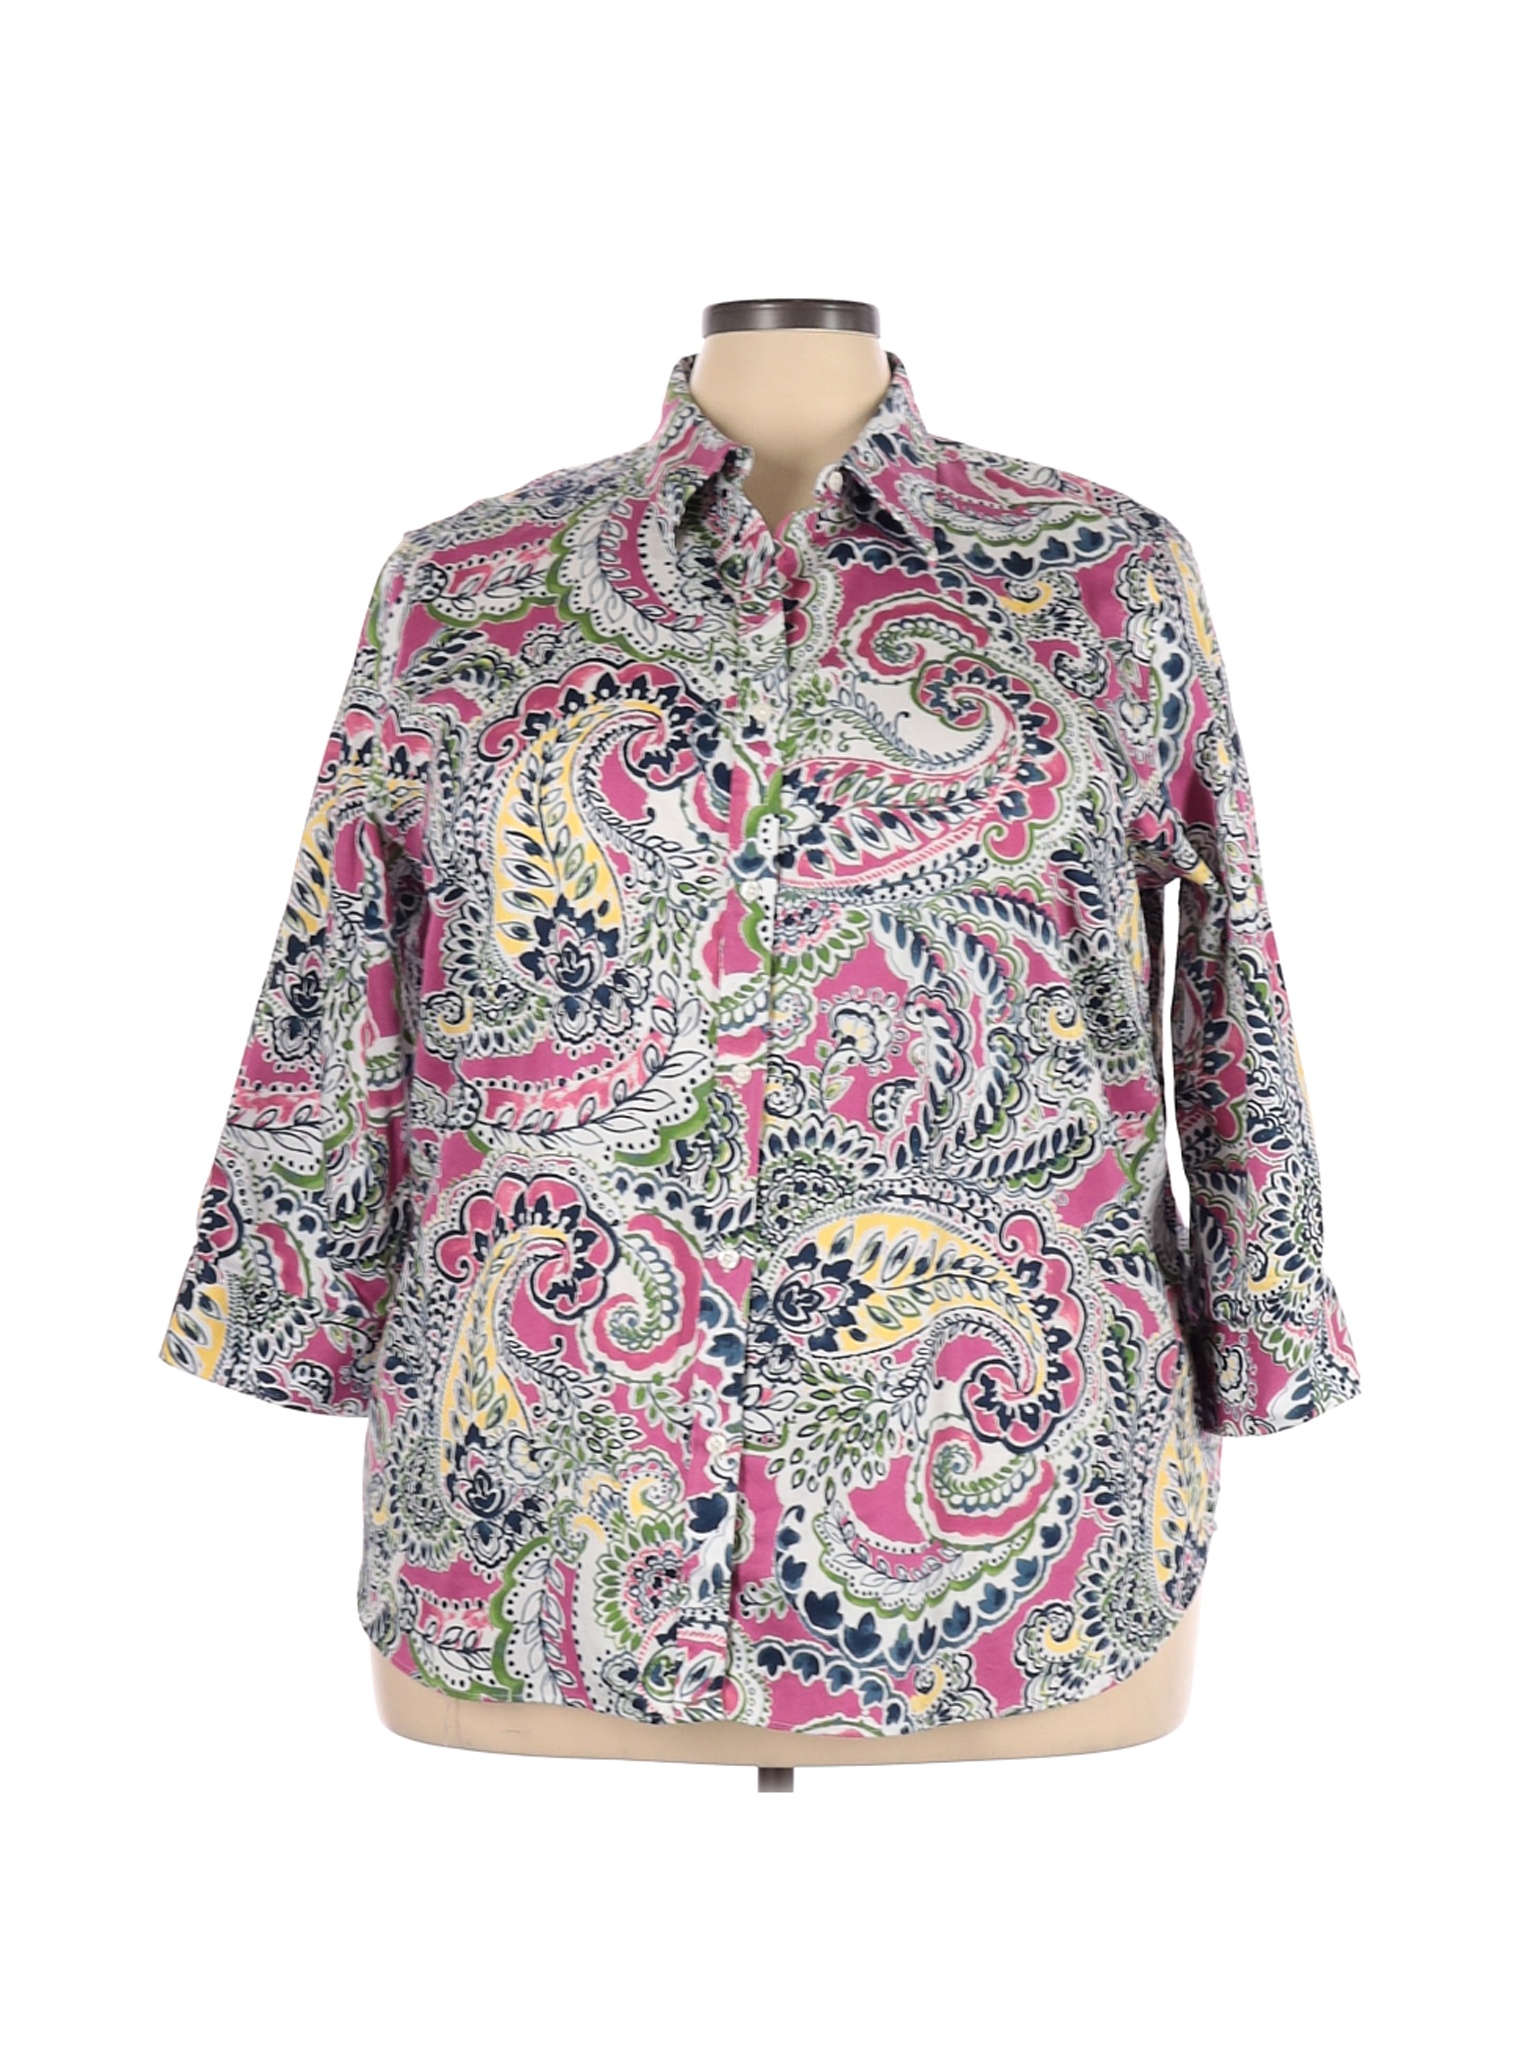 Chaps 100% Cotton Paisley Pink 3/4 Sleeve Button-Down Shirt Size 3X ...